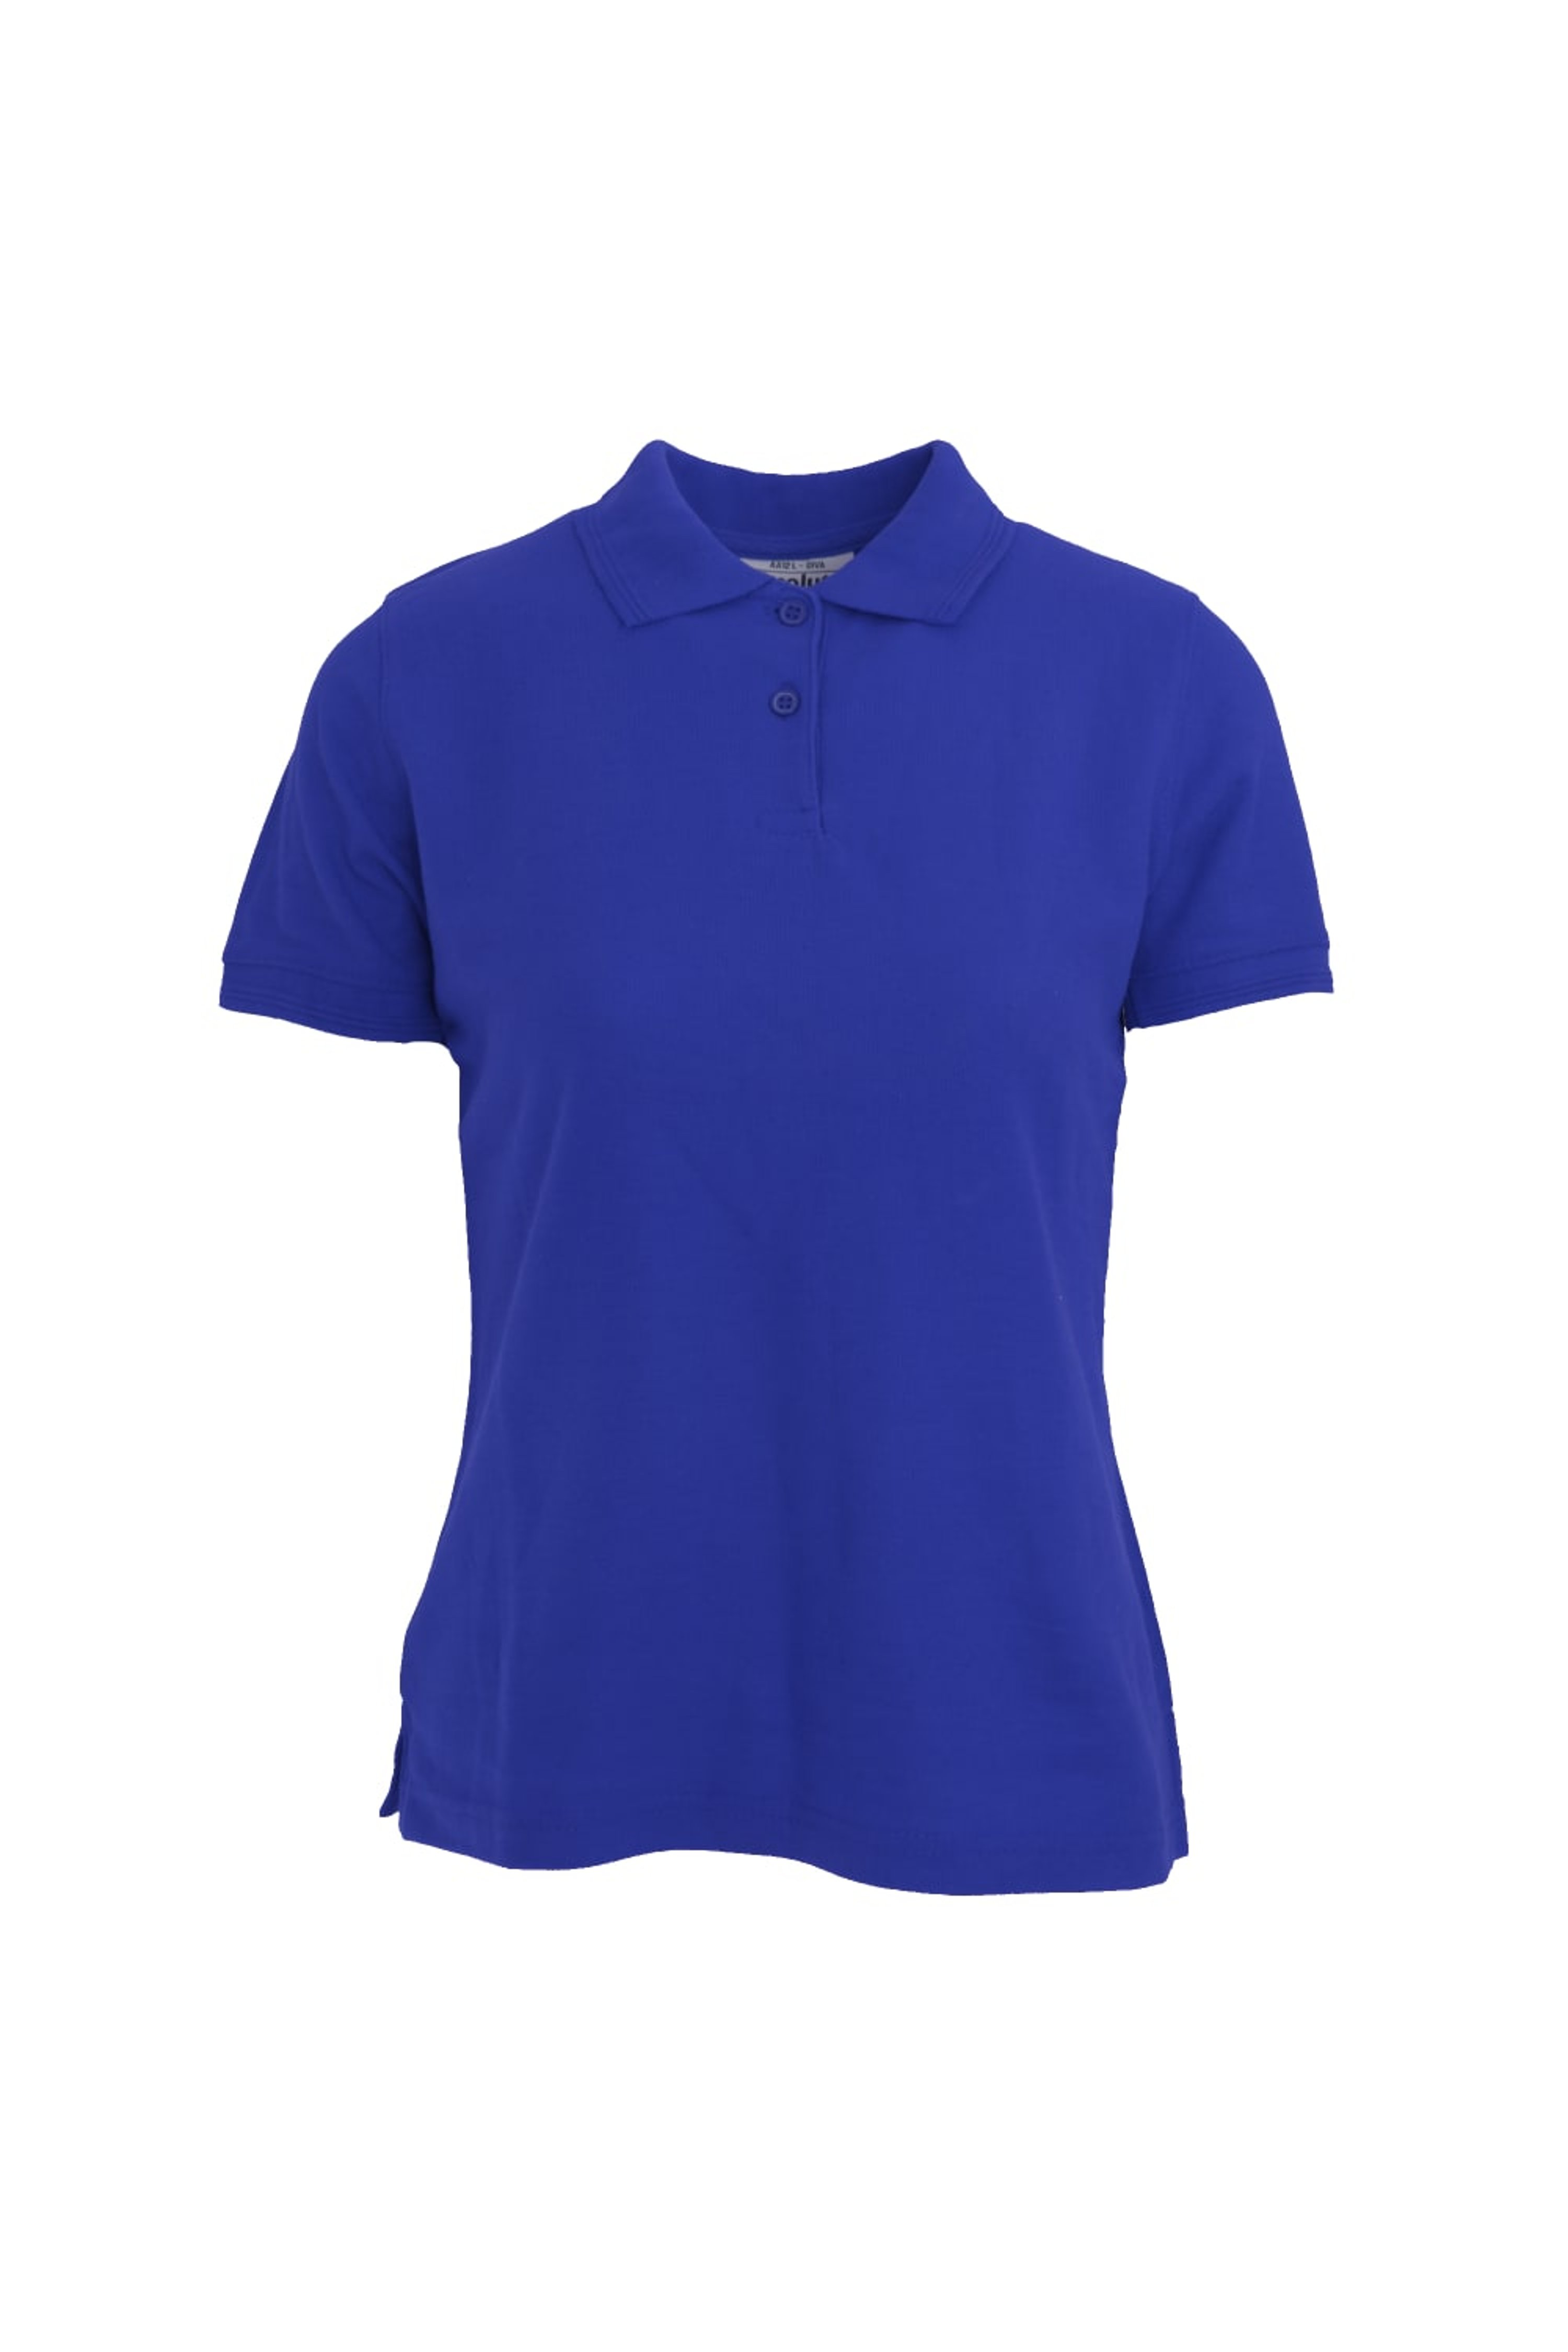 ABSOLUTE APPAREL ABSOLUTE APPAREL WOMENS/LADIES DIVA POLO